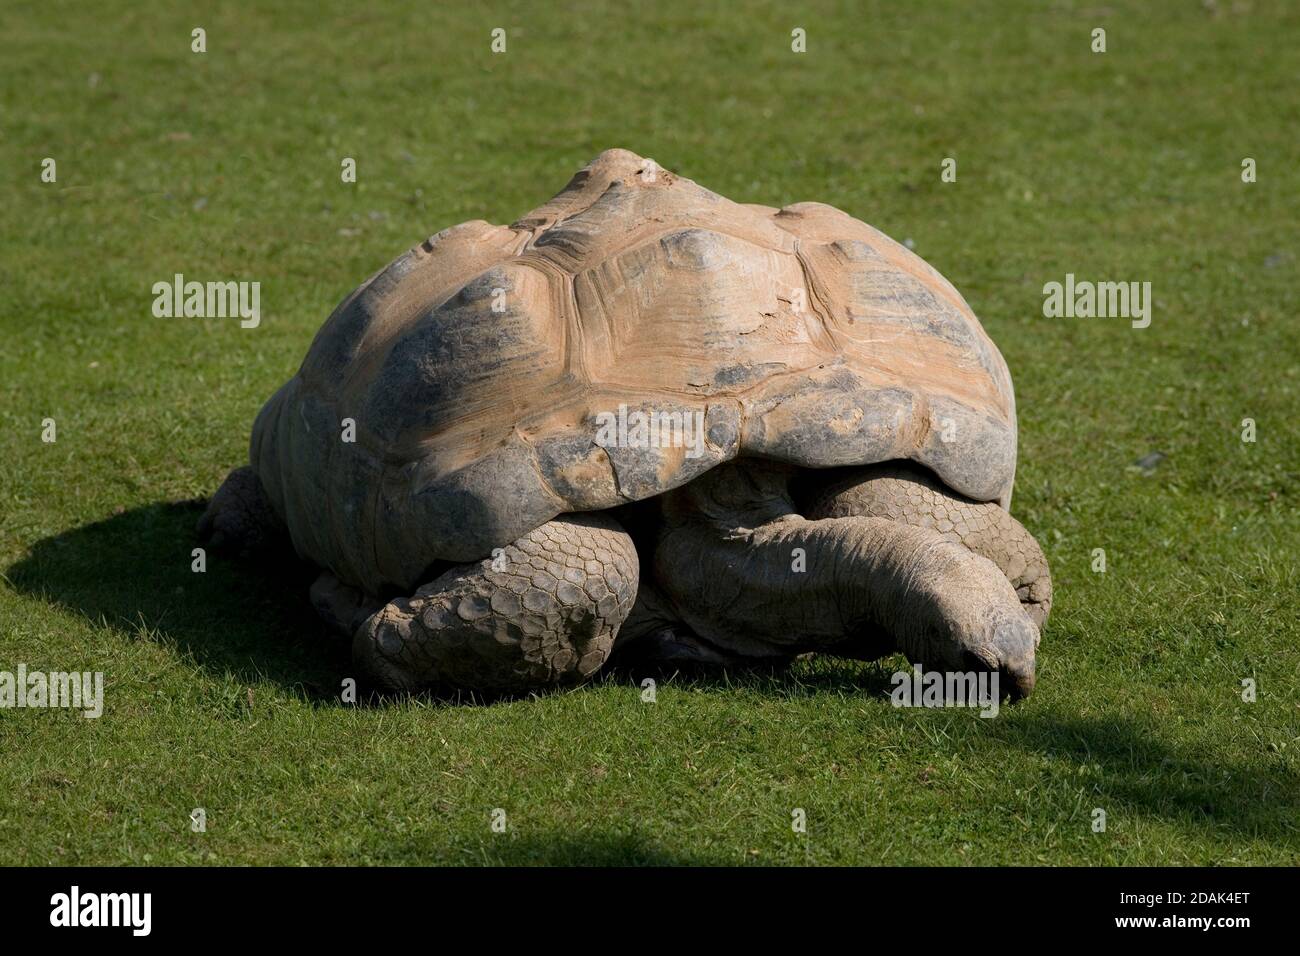 Aldabra giant tortoise eating grass at Cotswold Wildlife Park Stock Photo